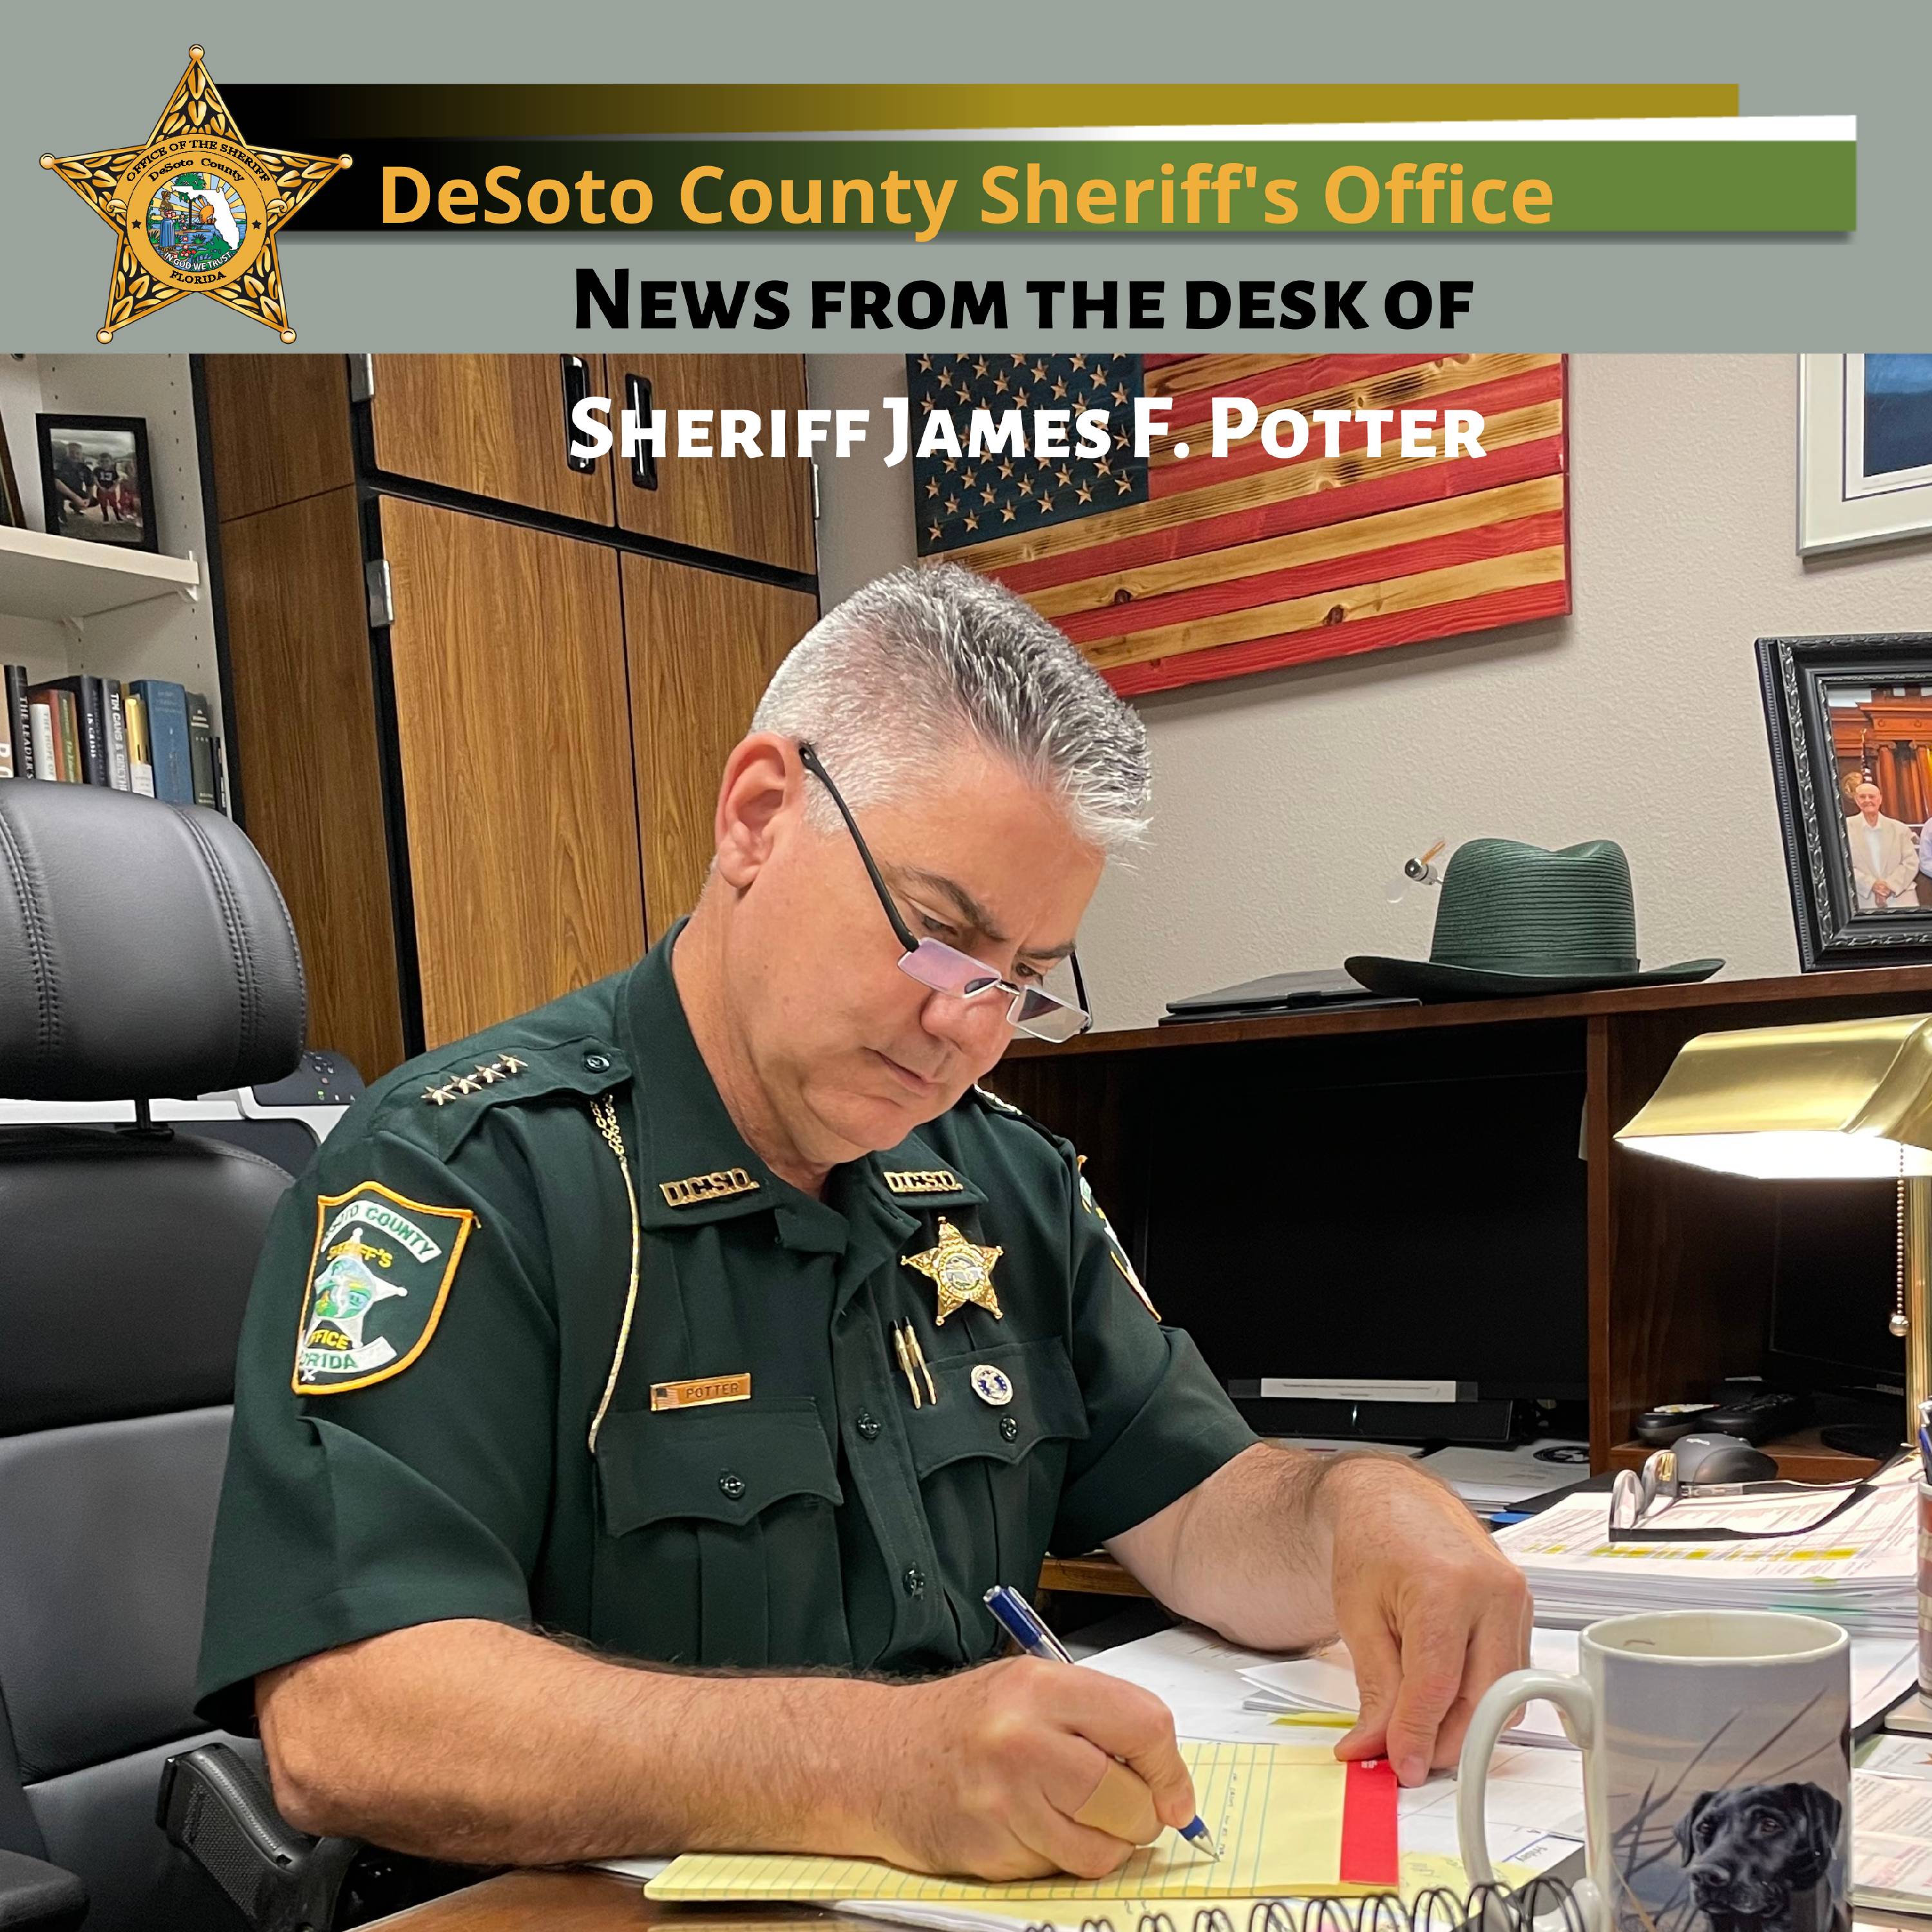 Sheriff Potter writing his news article - Copy